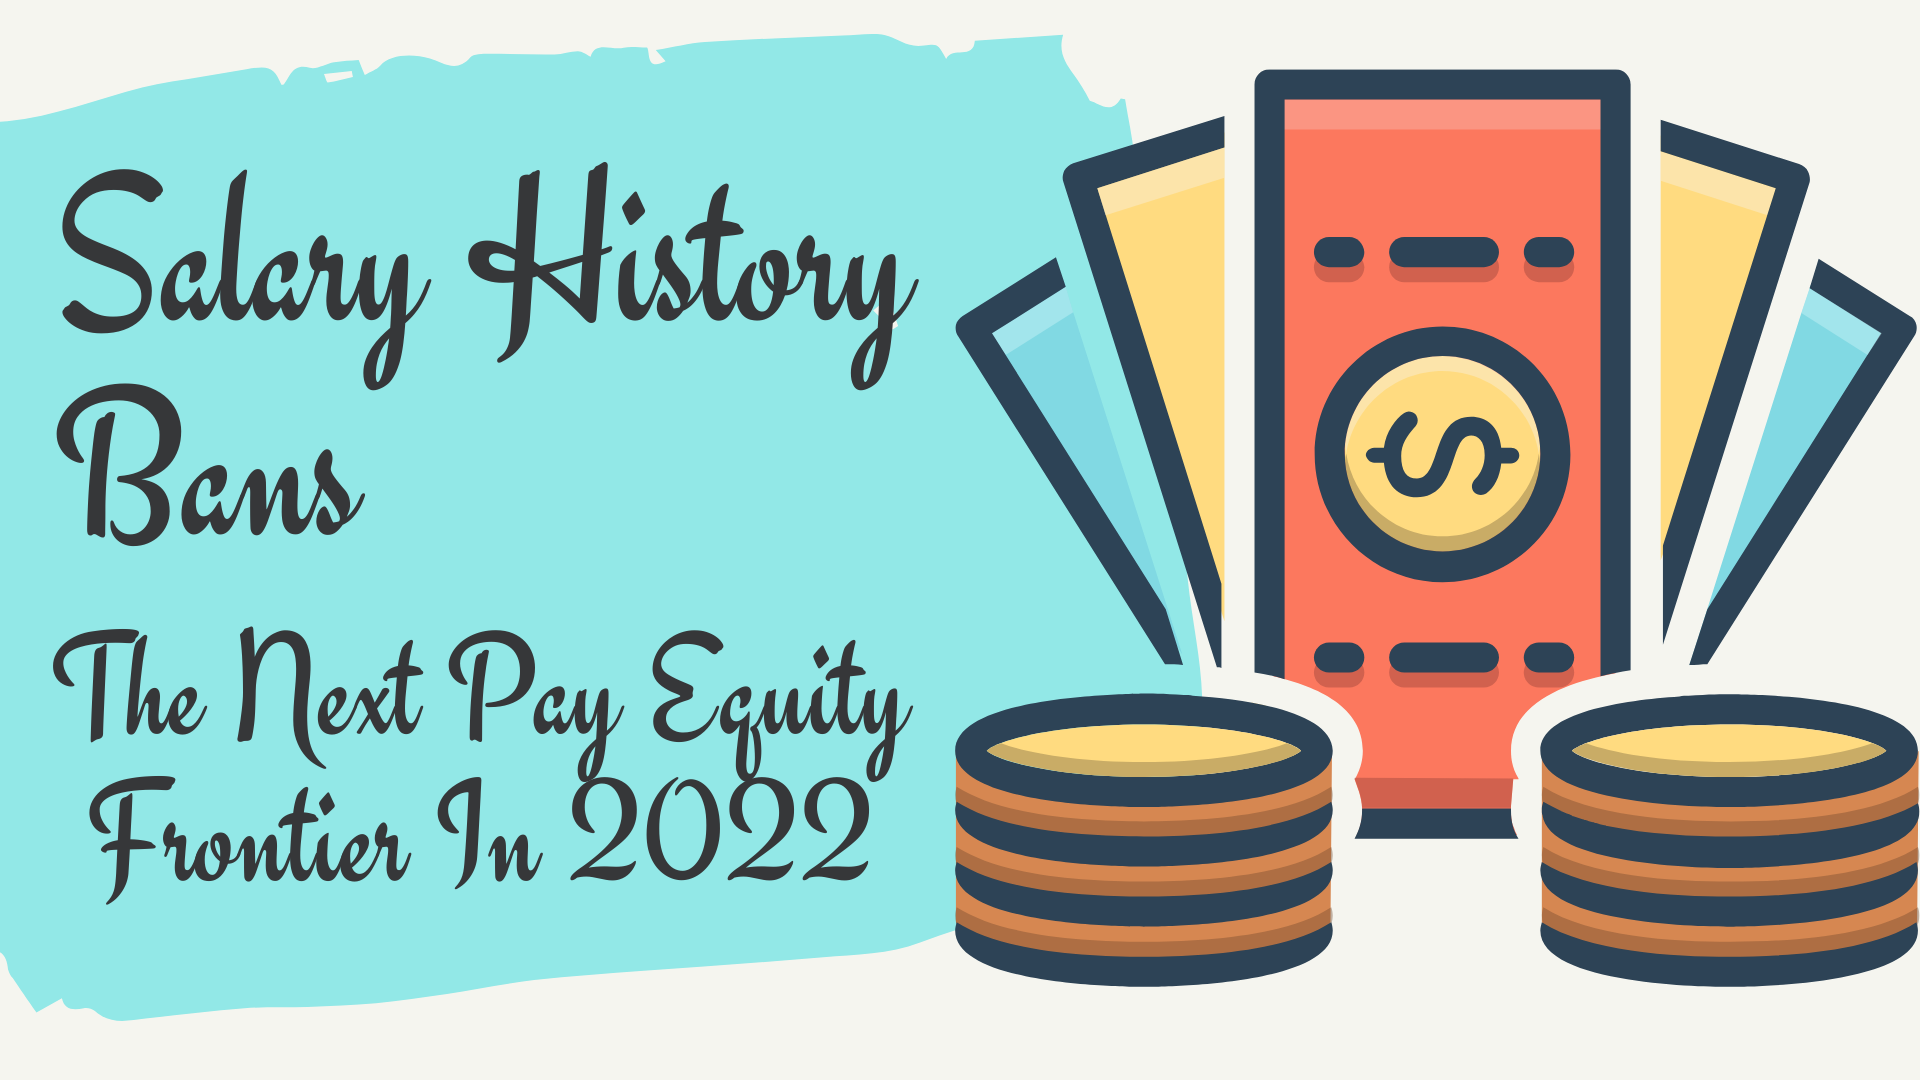 Salary History Bans: The Next Pay Equity Frontier In 2022, Online Event